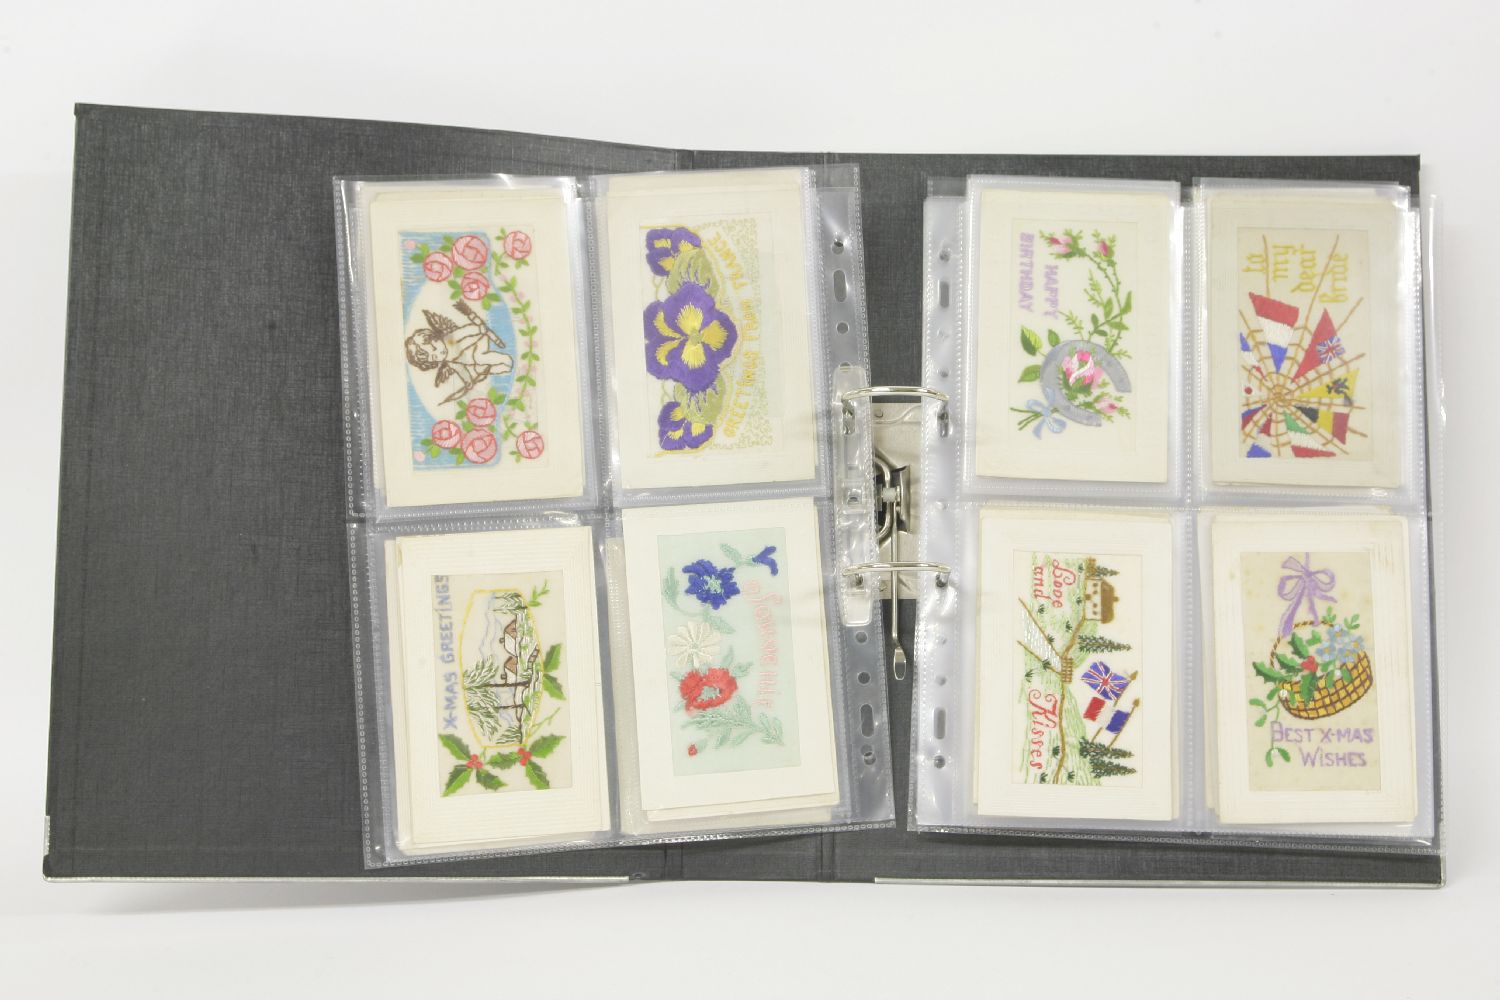 A postcard album, with embroidered cards, study cards, etc.